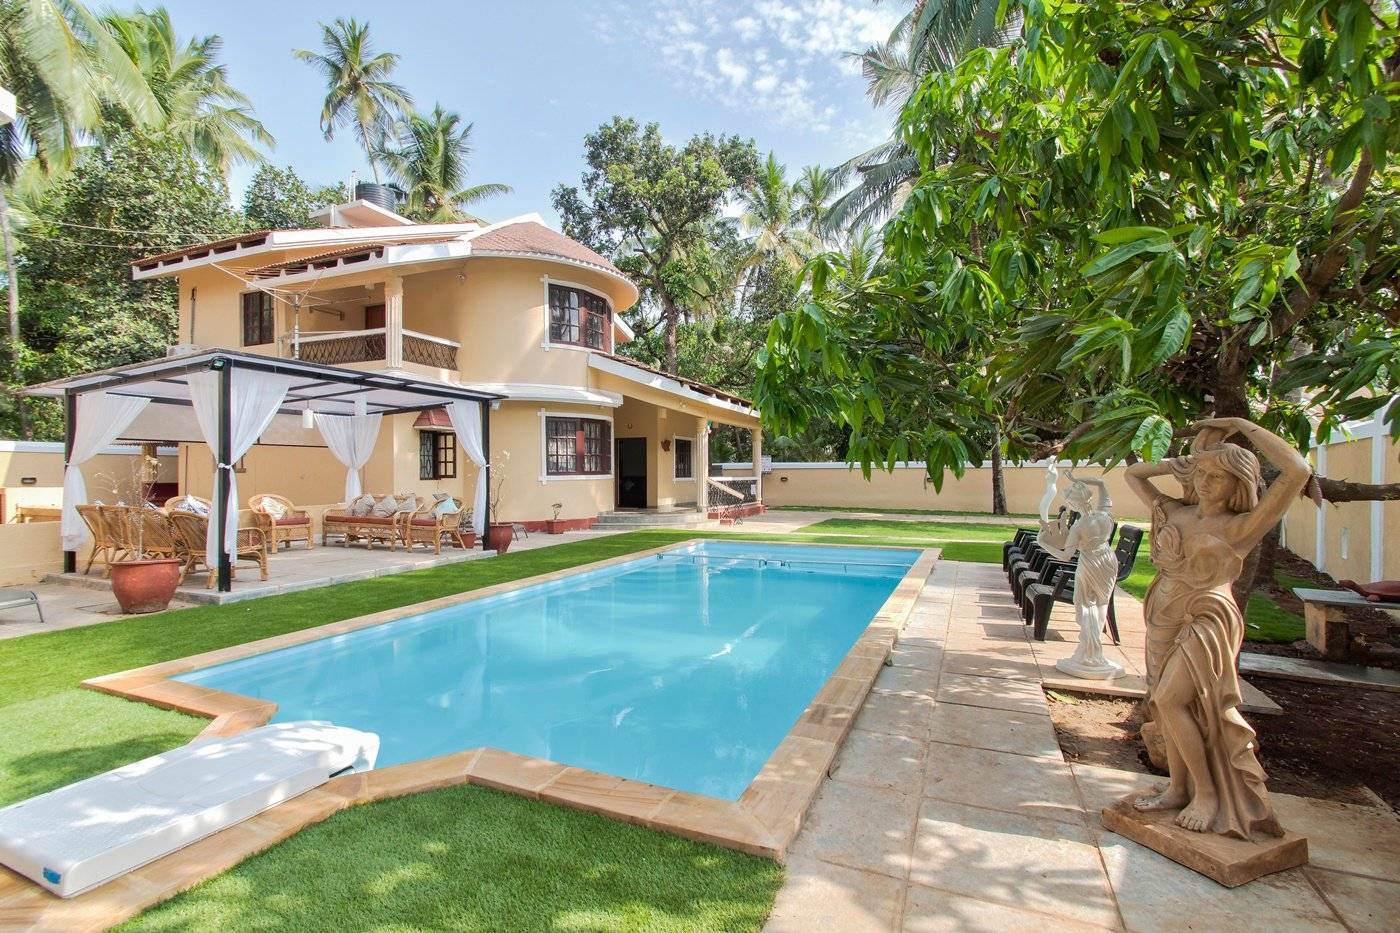 The villa rental for your dream vacation